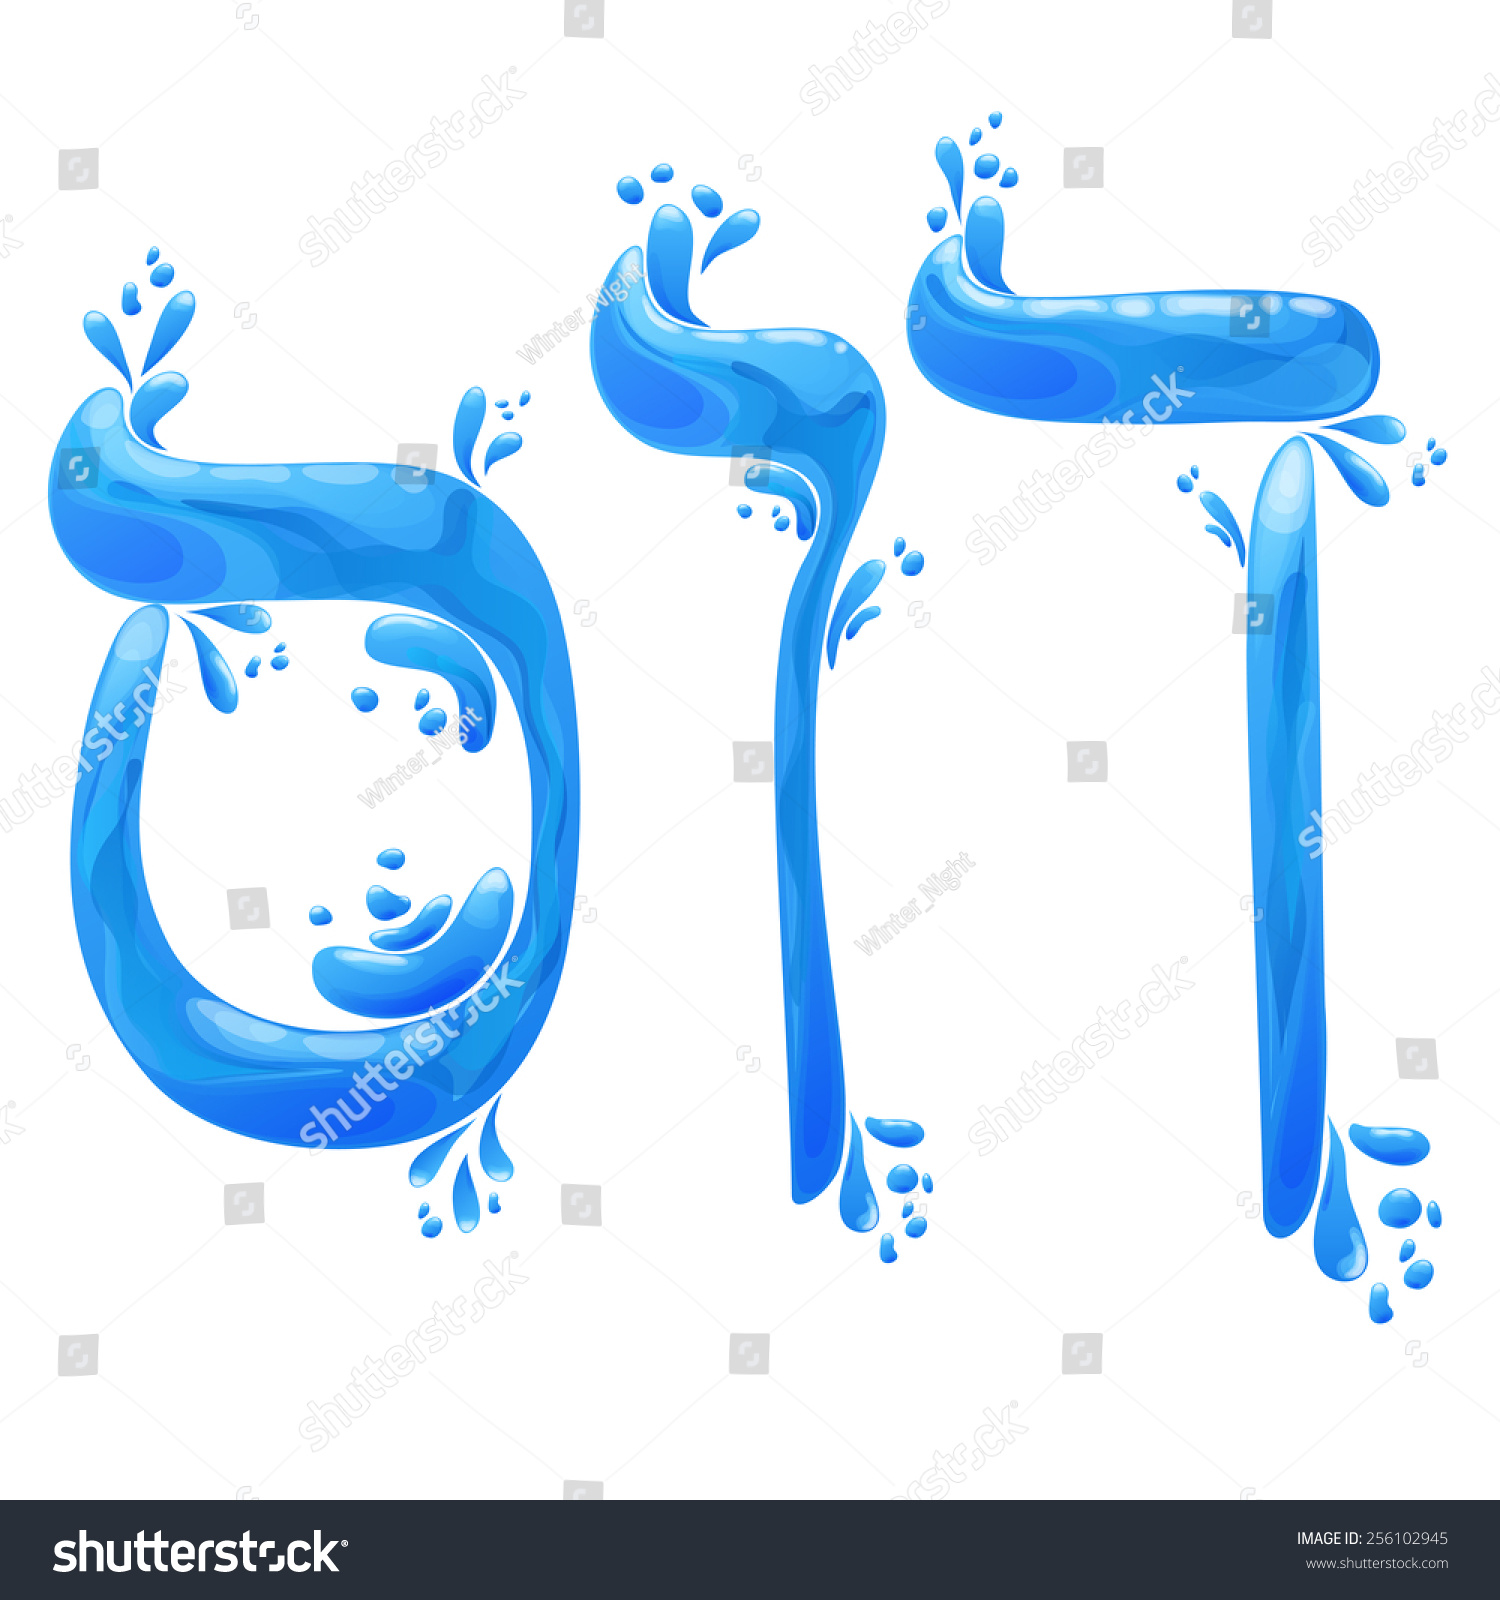 Abstract The Hebrew Alphabet In The Form Of Blue Water Drops Stock ...